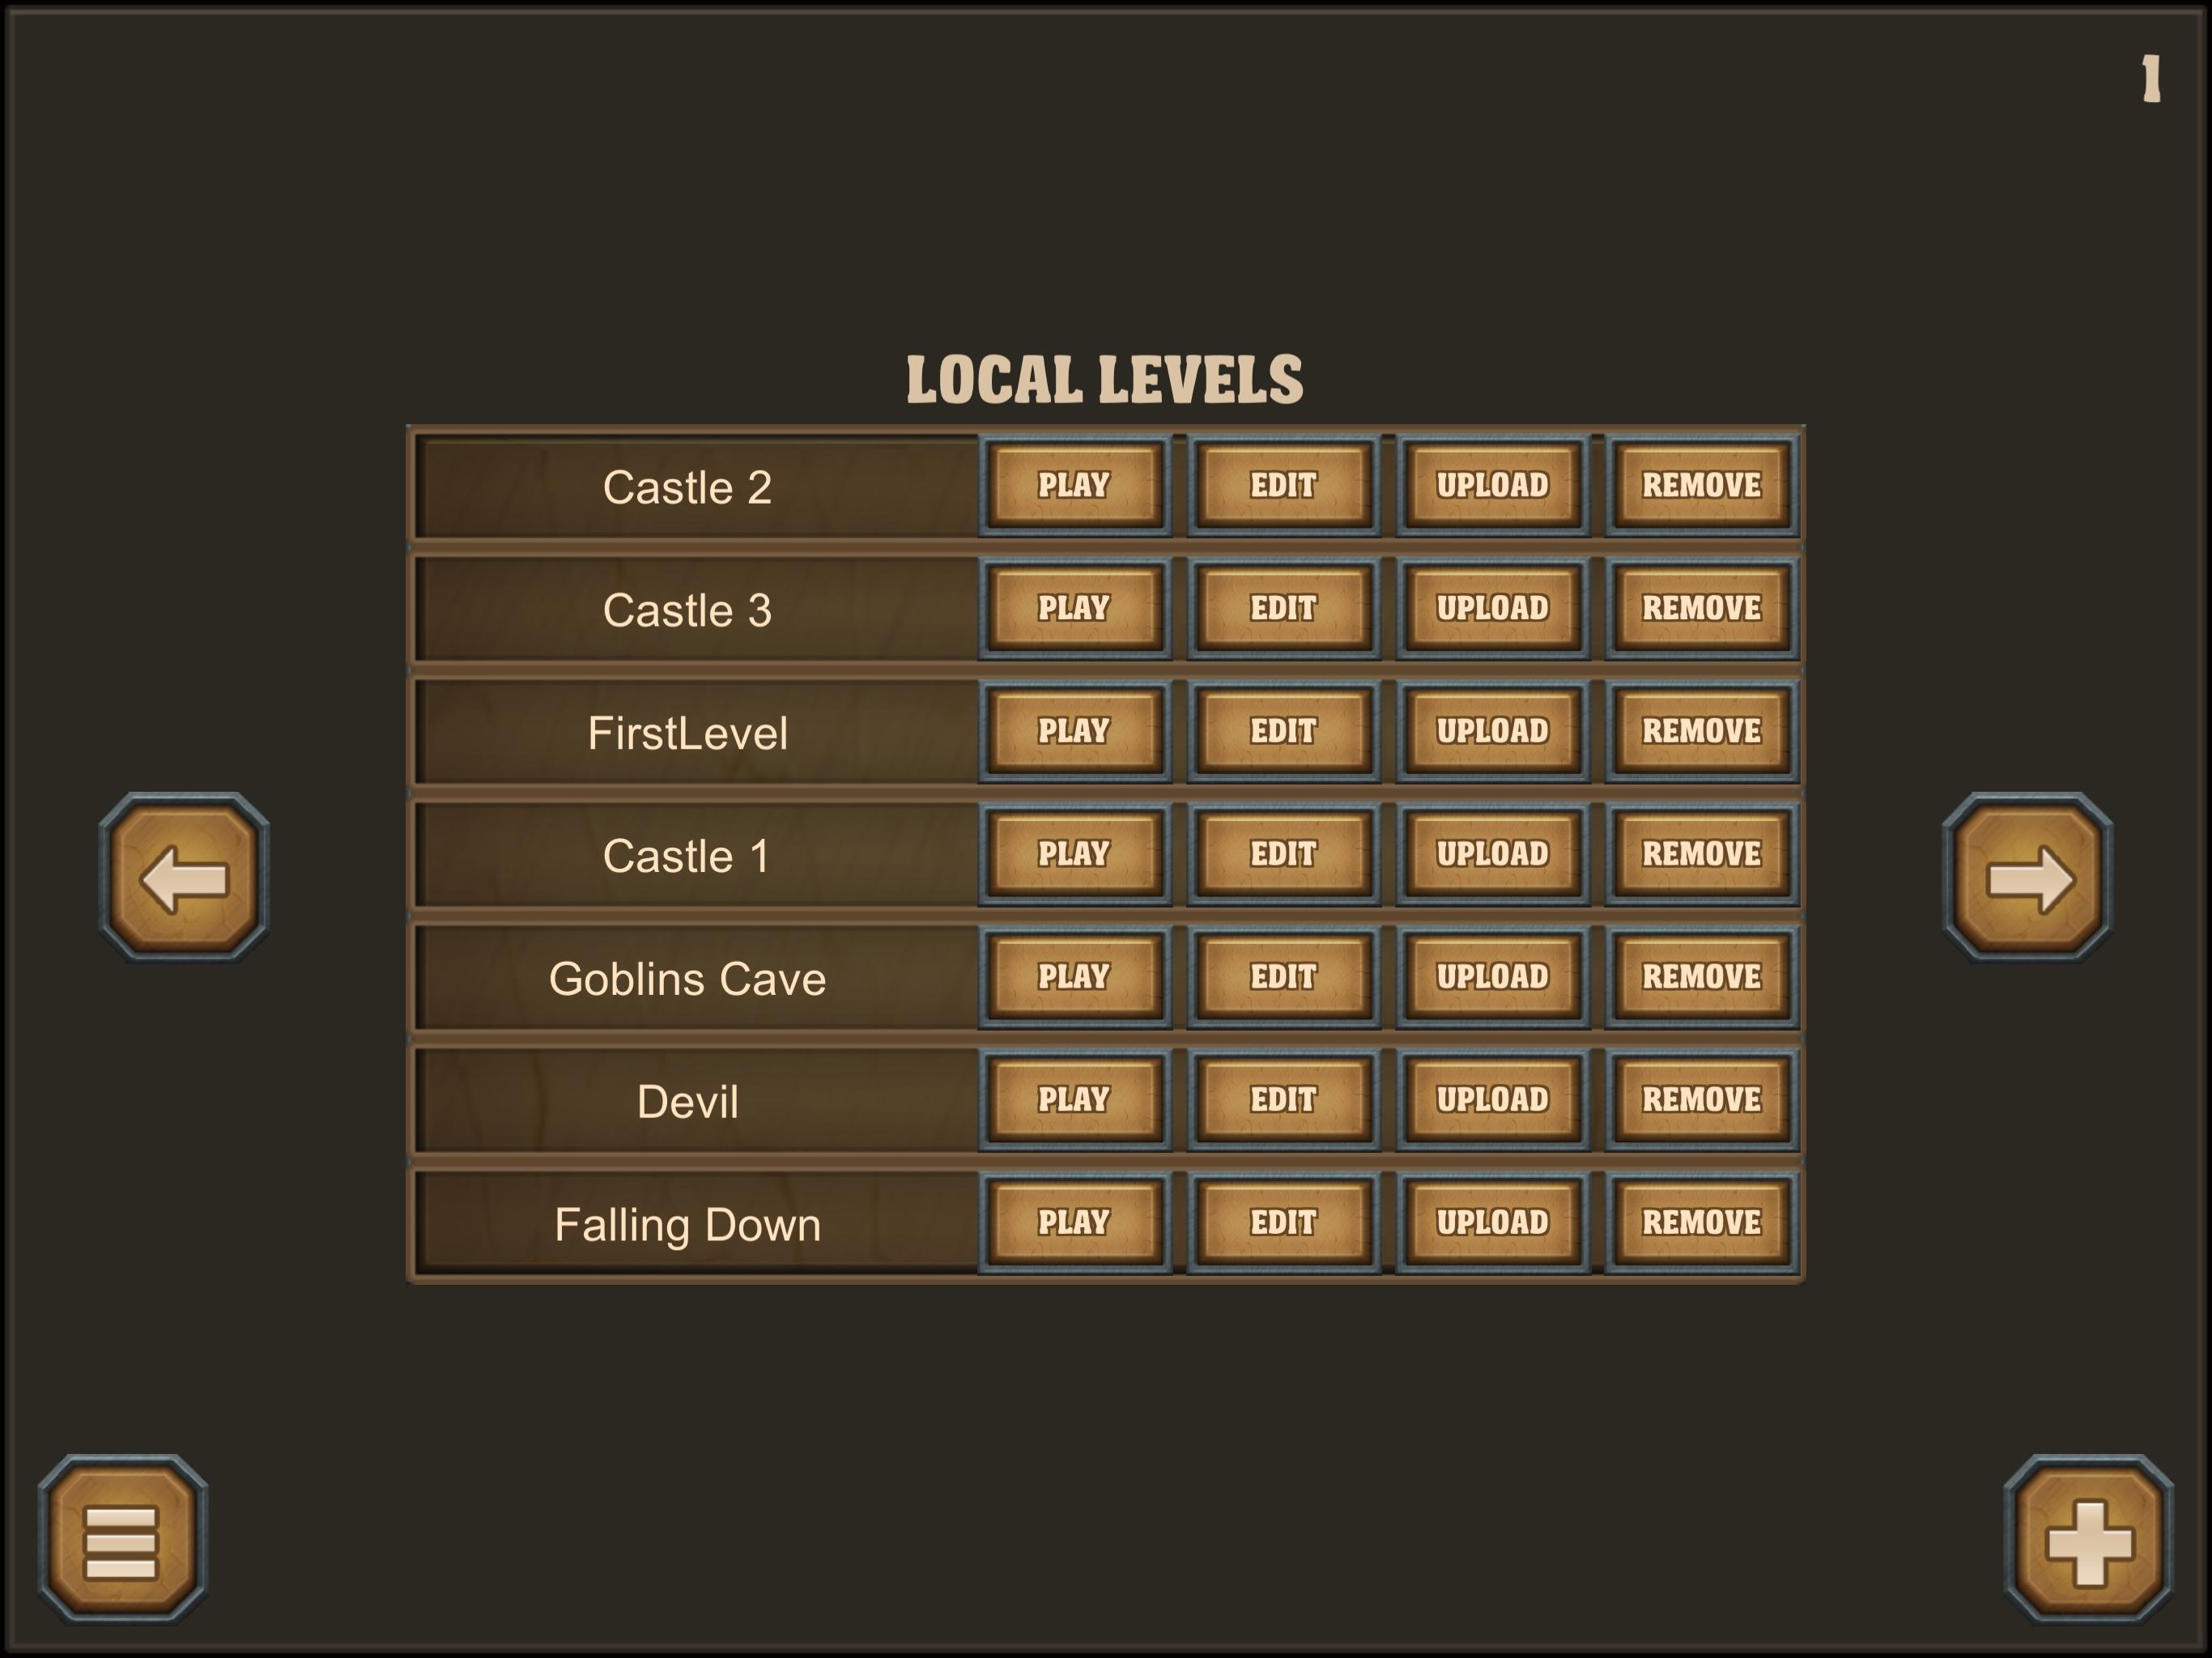 Epic Game Maker Create and Share Your Levels 1.9 Screenshot 14